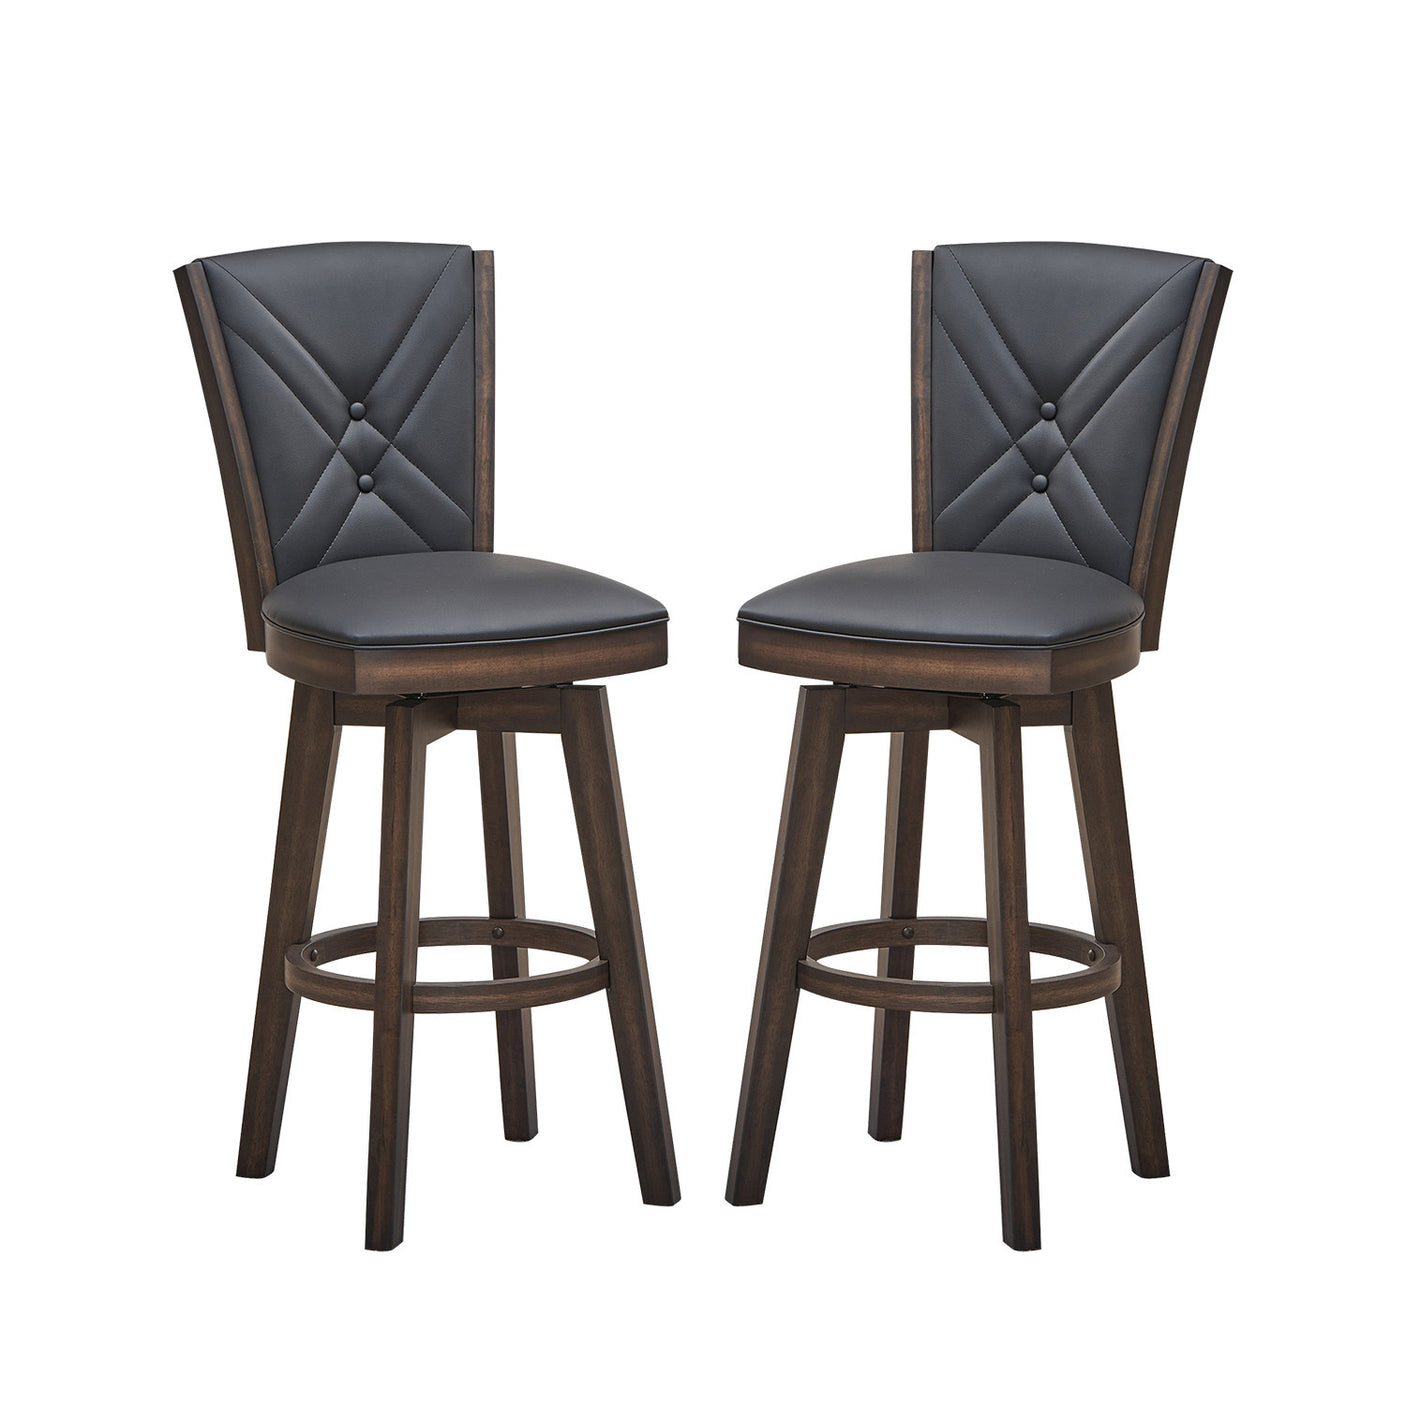 29" Seat Height Black Faux Leather Counter Stool, Set of 2 - Home Elegance USA